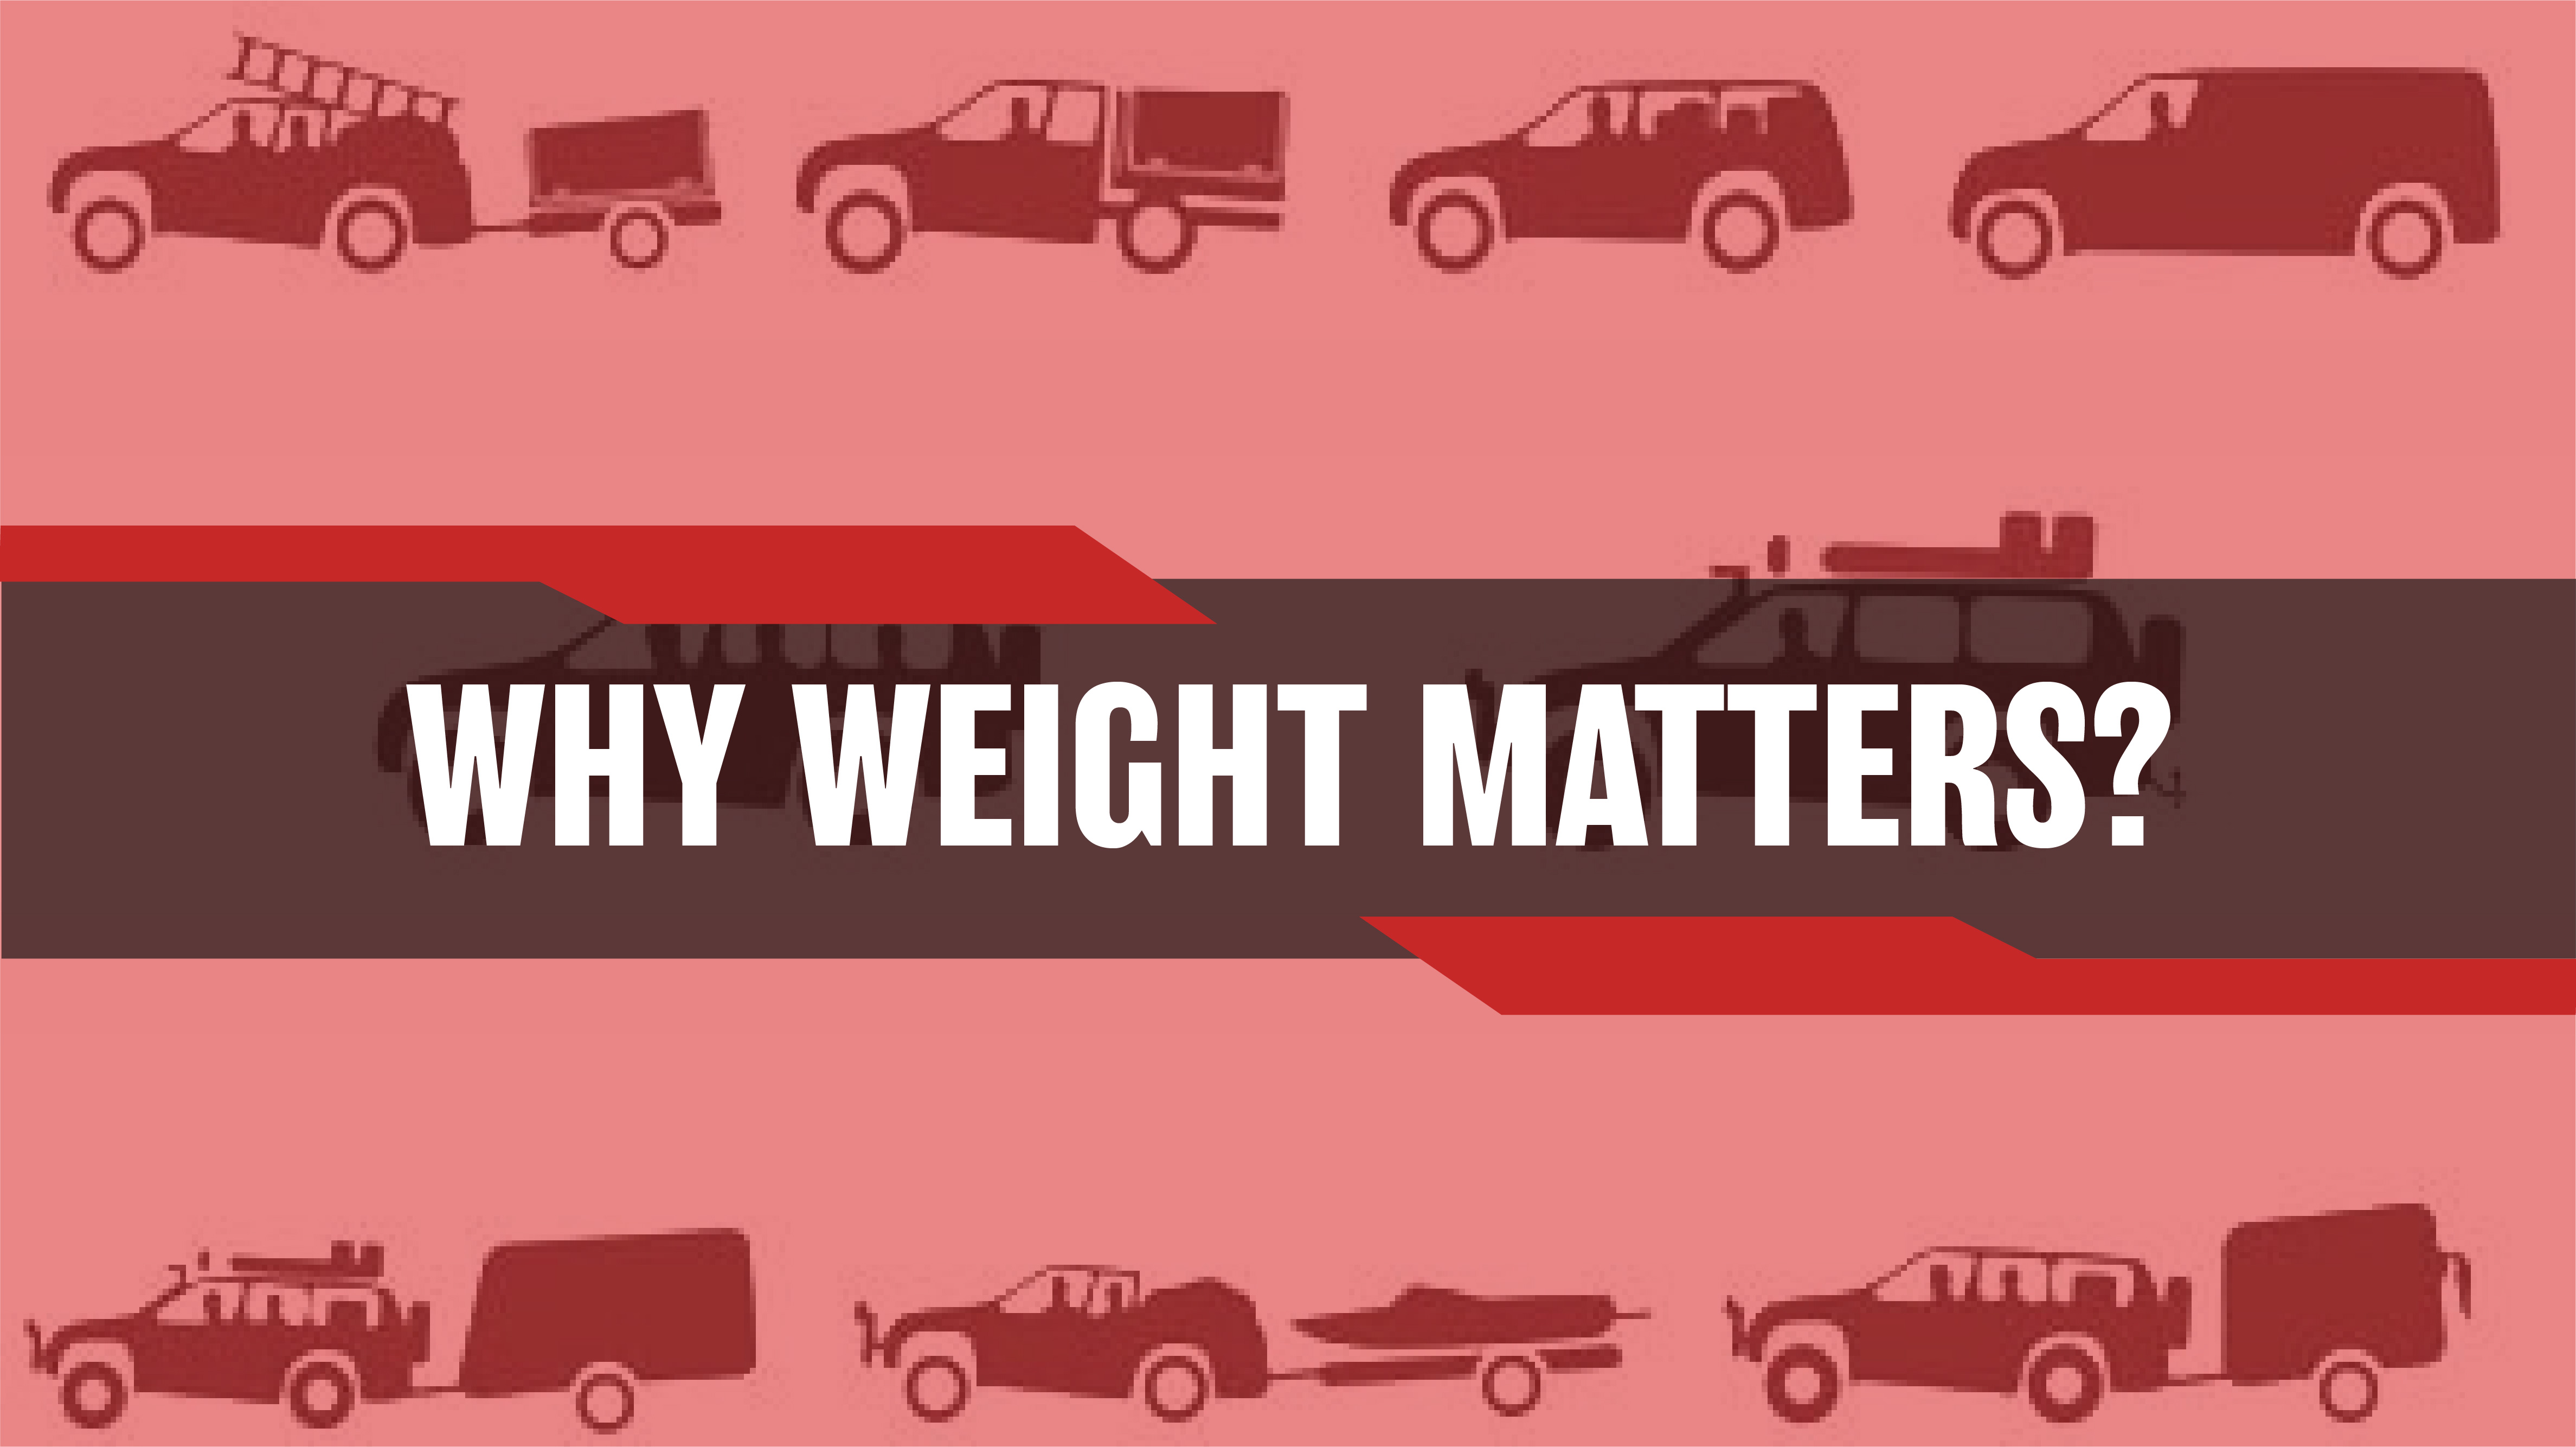 Why weight matters?